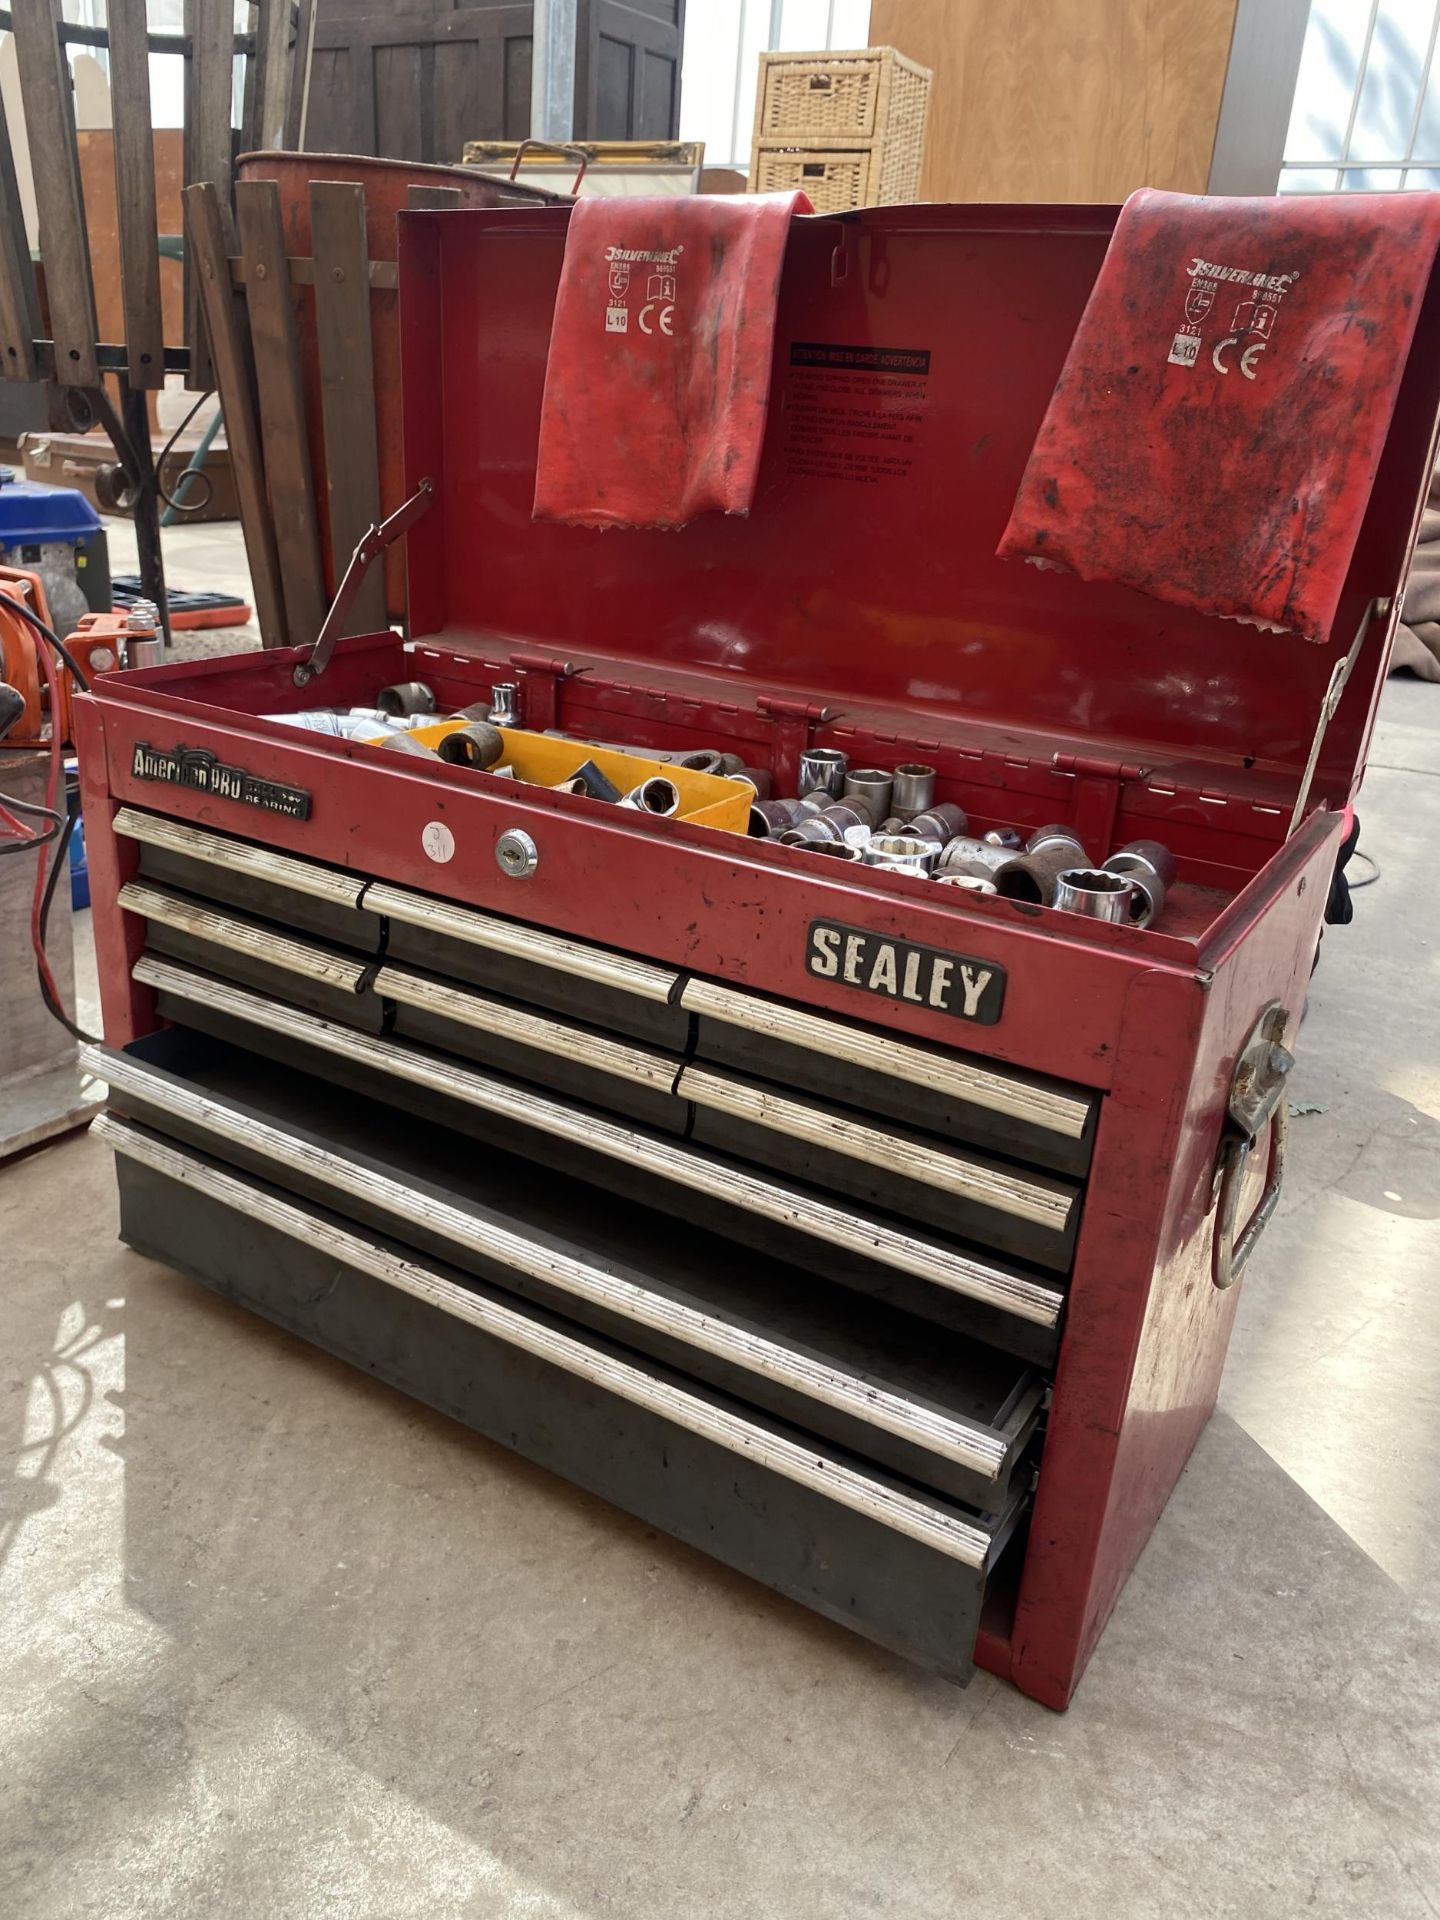 A METAL SEALEY WORKSHOP TOOL CHEST WITH AN ASSORTMENT OF SOCKETS - Image 2 of 4